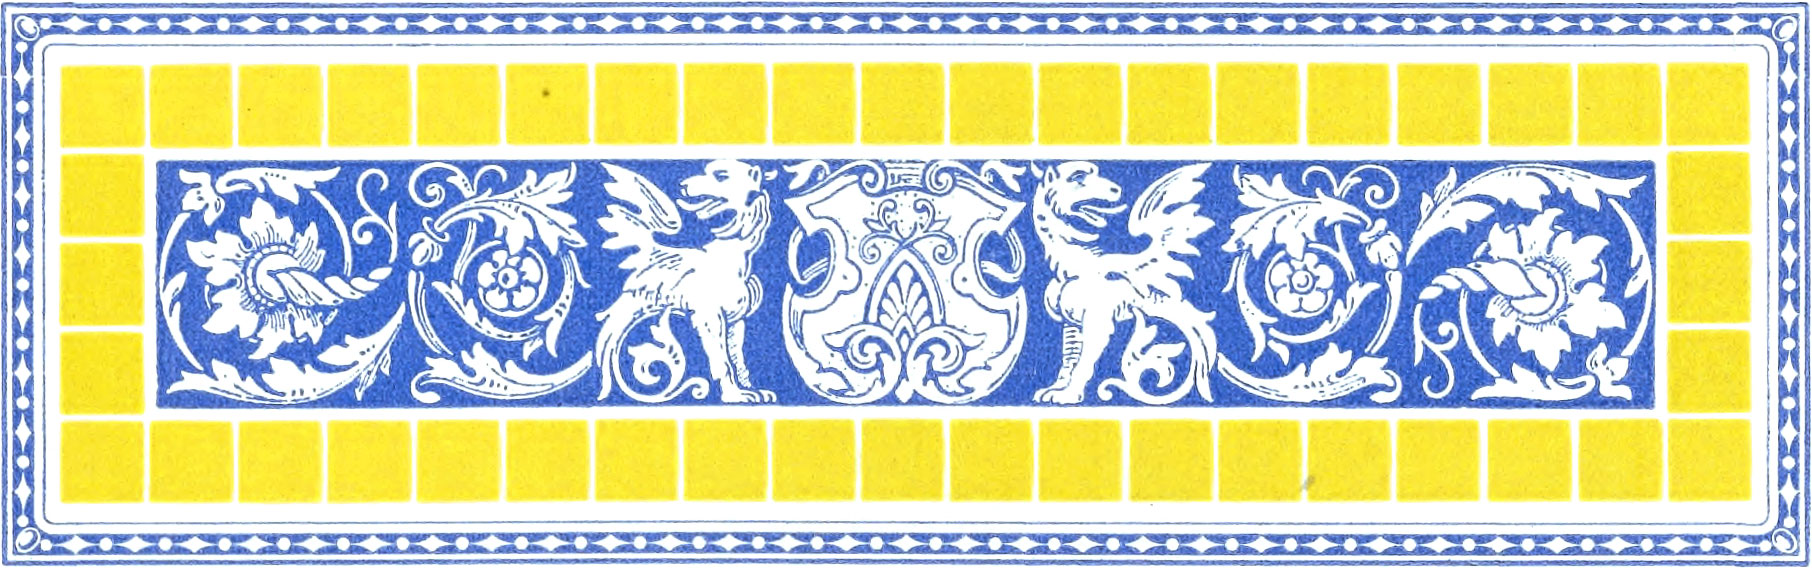 Ornate blue horizontal graphic of griffins, a crest, and floral filigree bordered by green-yellow tiles and a violet-blue border